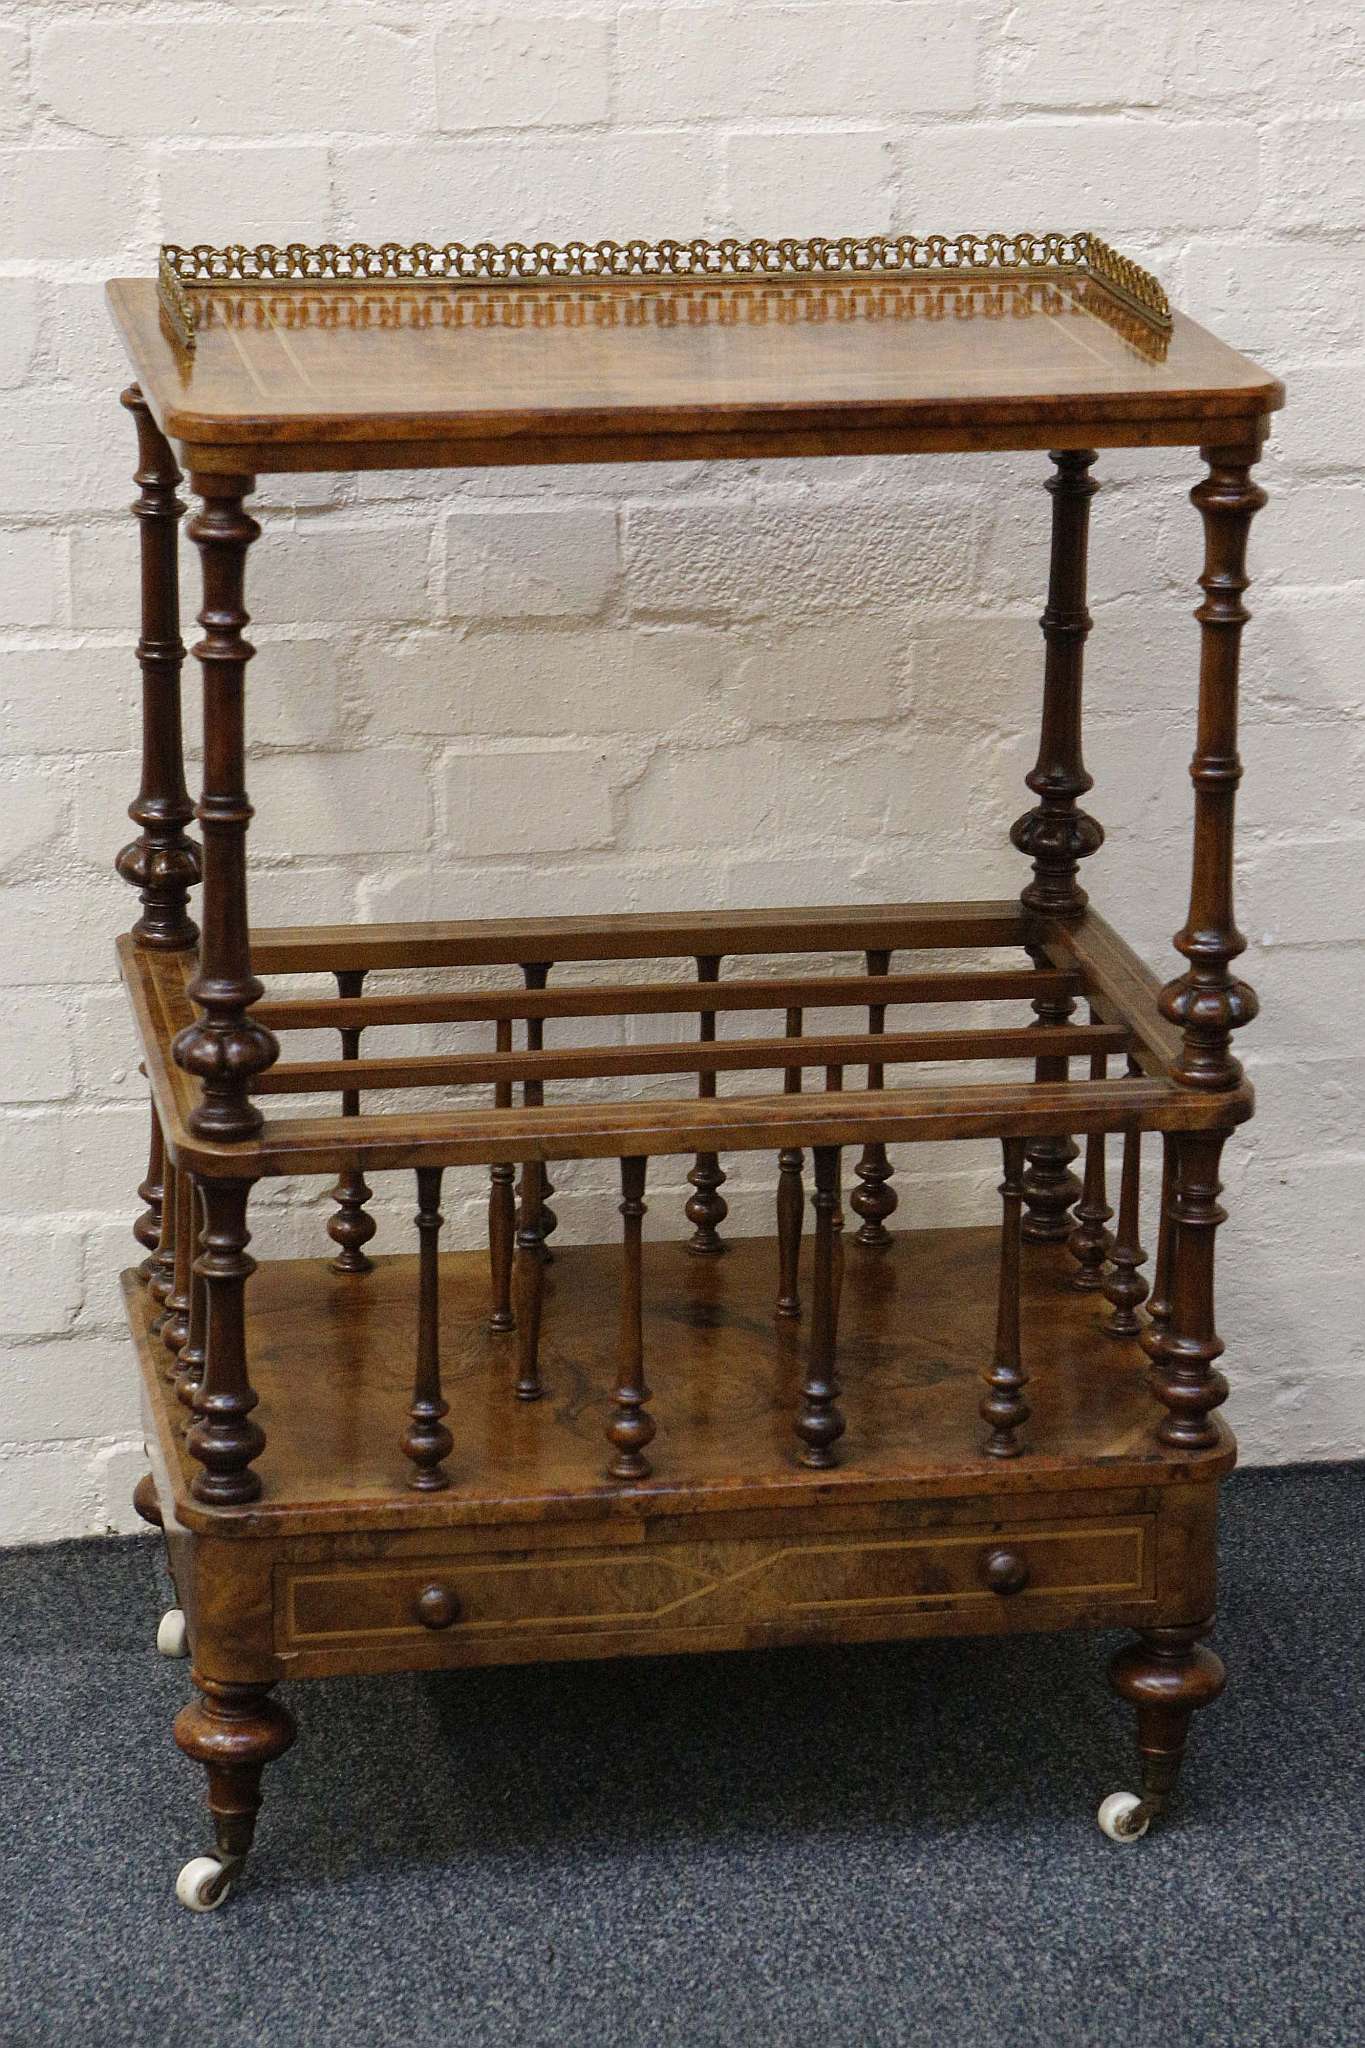 A mid 19th century Canterbury, burr walnut with boxwood inlay, brass gallery, turned supports